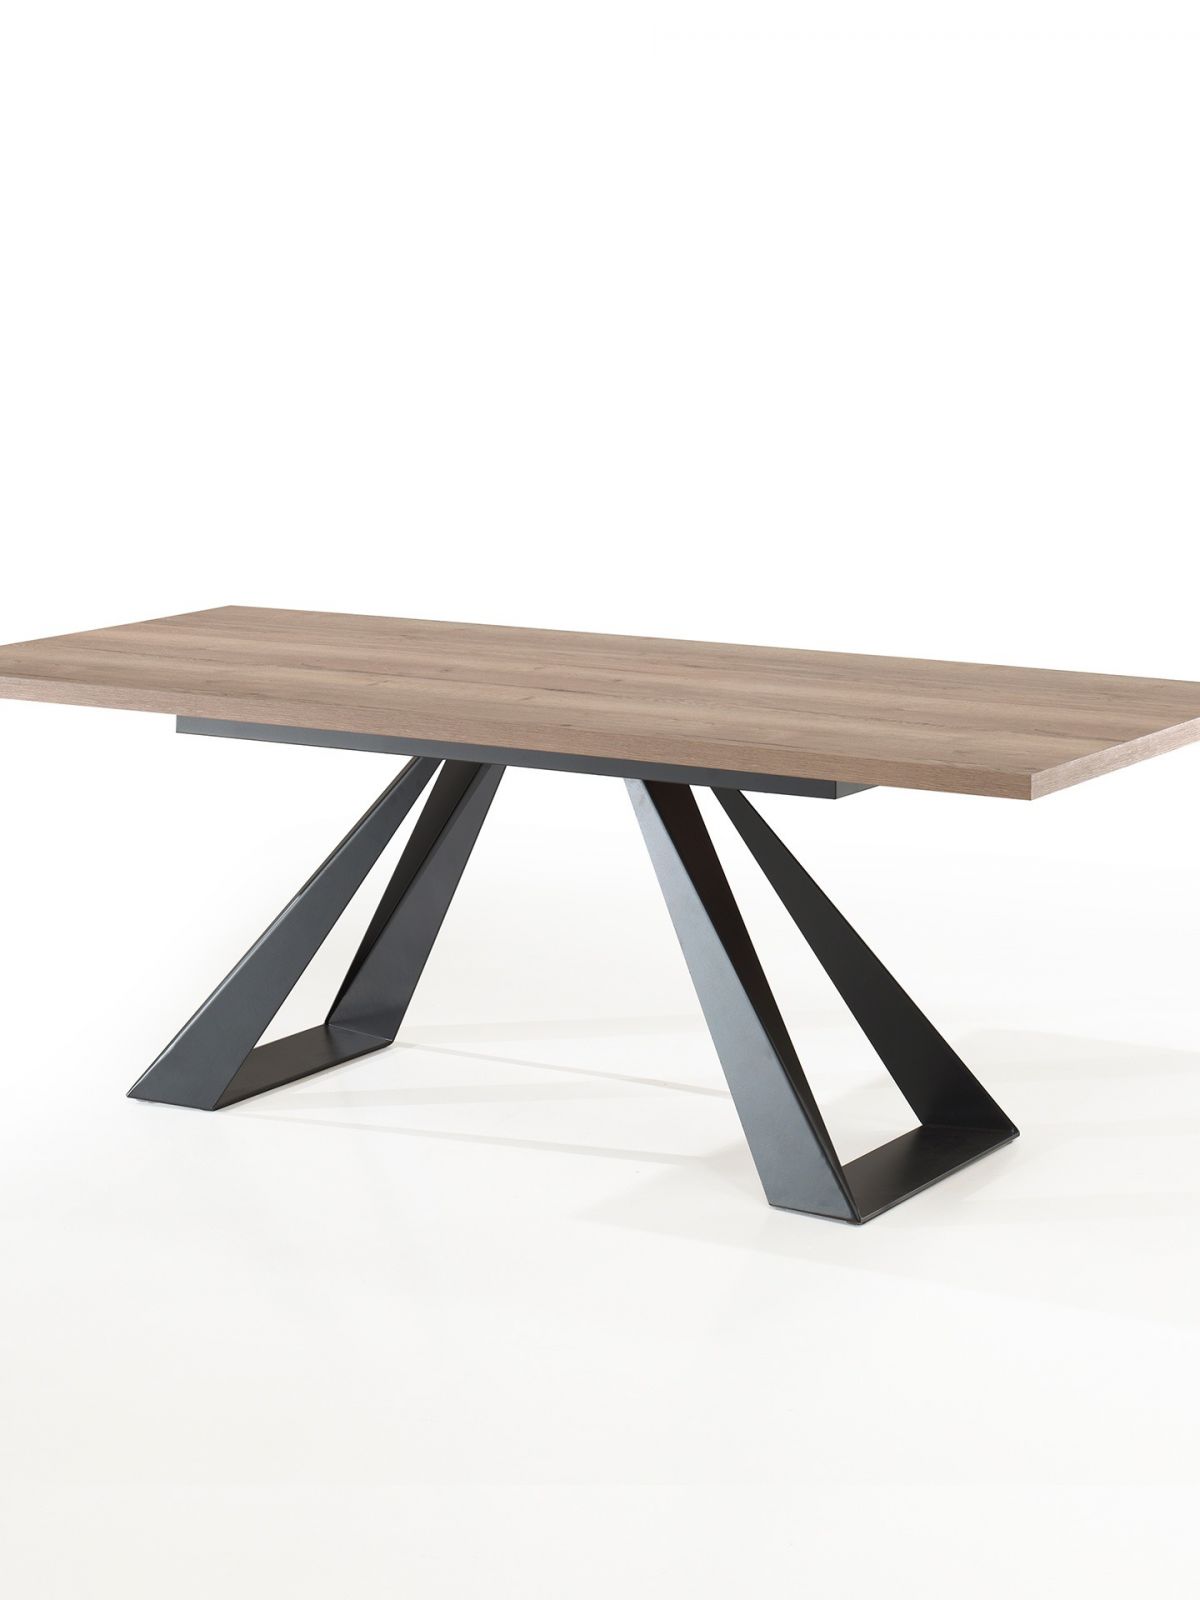 Table fixe rectangulaire A-pied - 2,4m